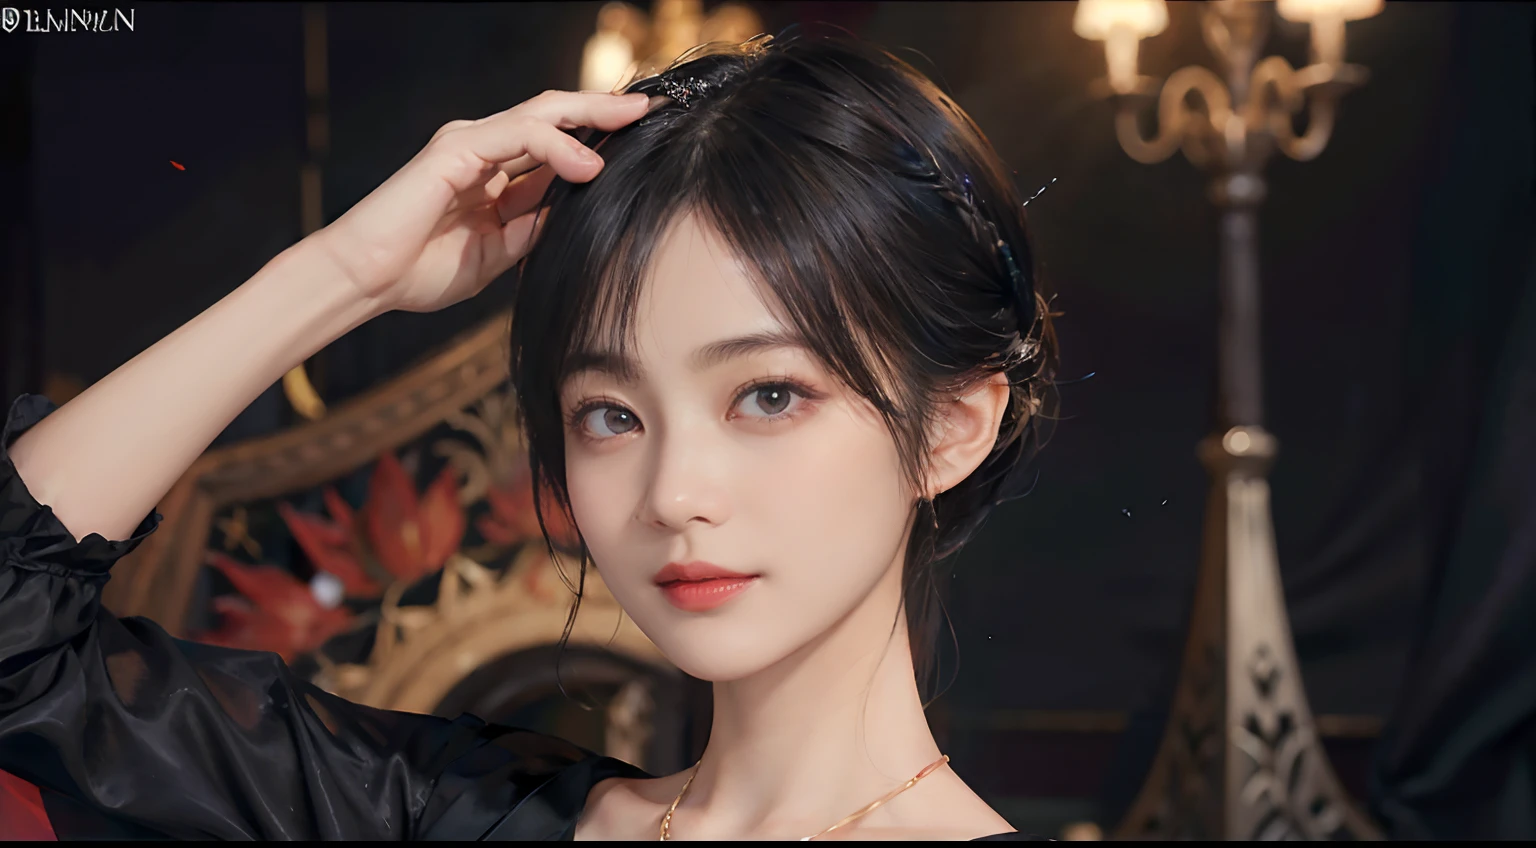 ((1womanl)),  (((Black shorthair))), （masuter piece：1,3）、top-quality、​masterpiece、hight resolution、Original、highly detailed wallpaper、dress code、Luxurious necklace, (A slight smil)、a small face、((Breast))、(Red and blue dress)、(Light on Face)、Live-action style, Beautiful facial features, darkened room, ((Hu Dilan))